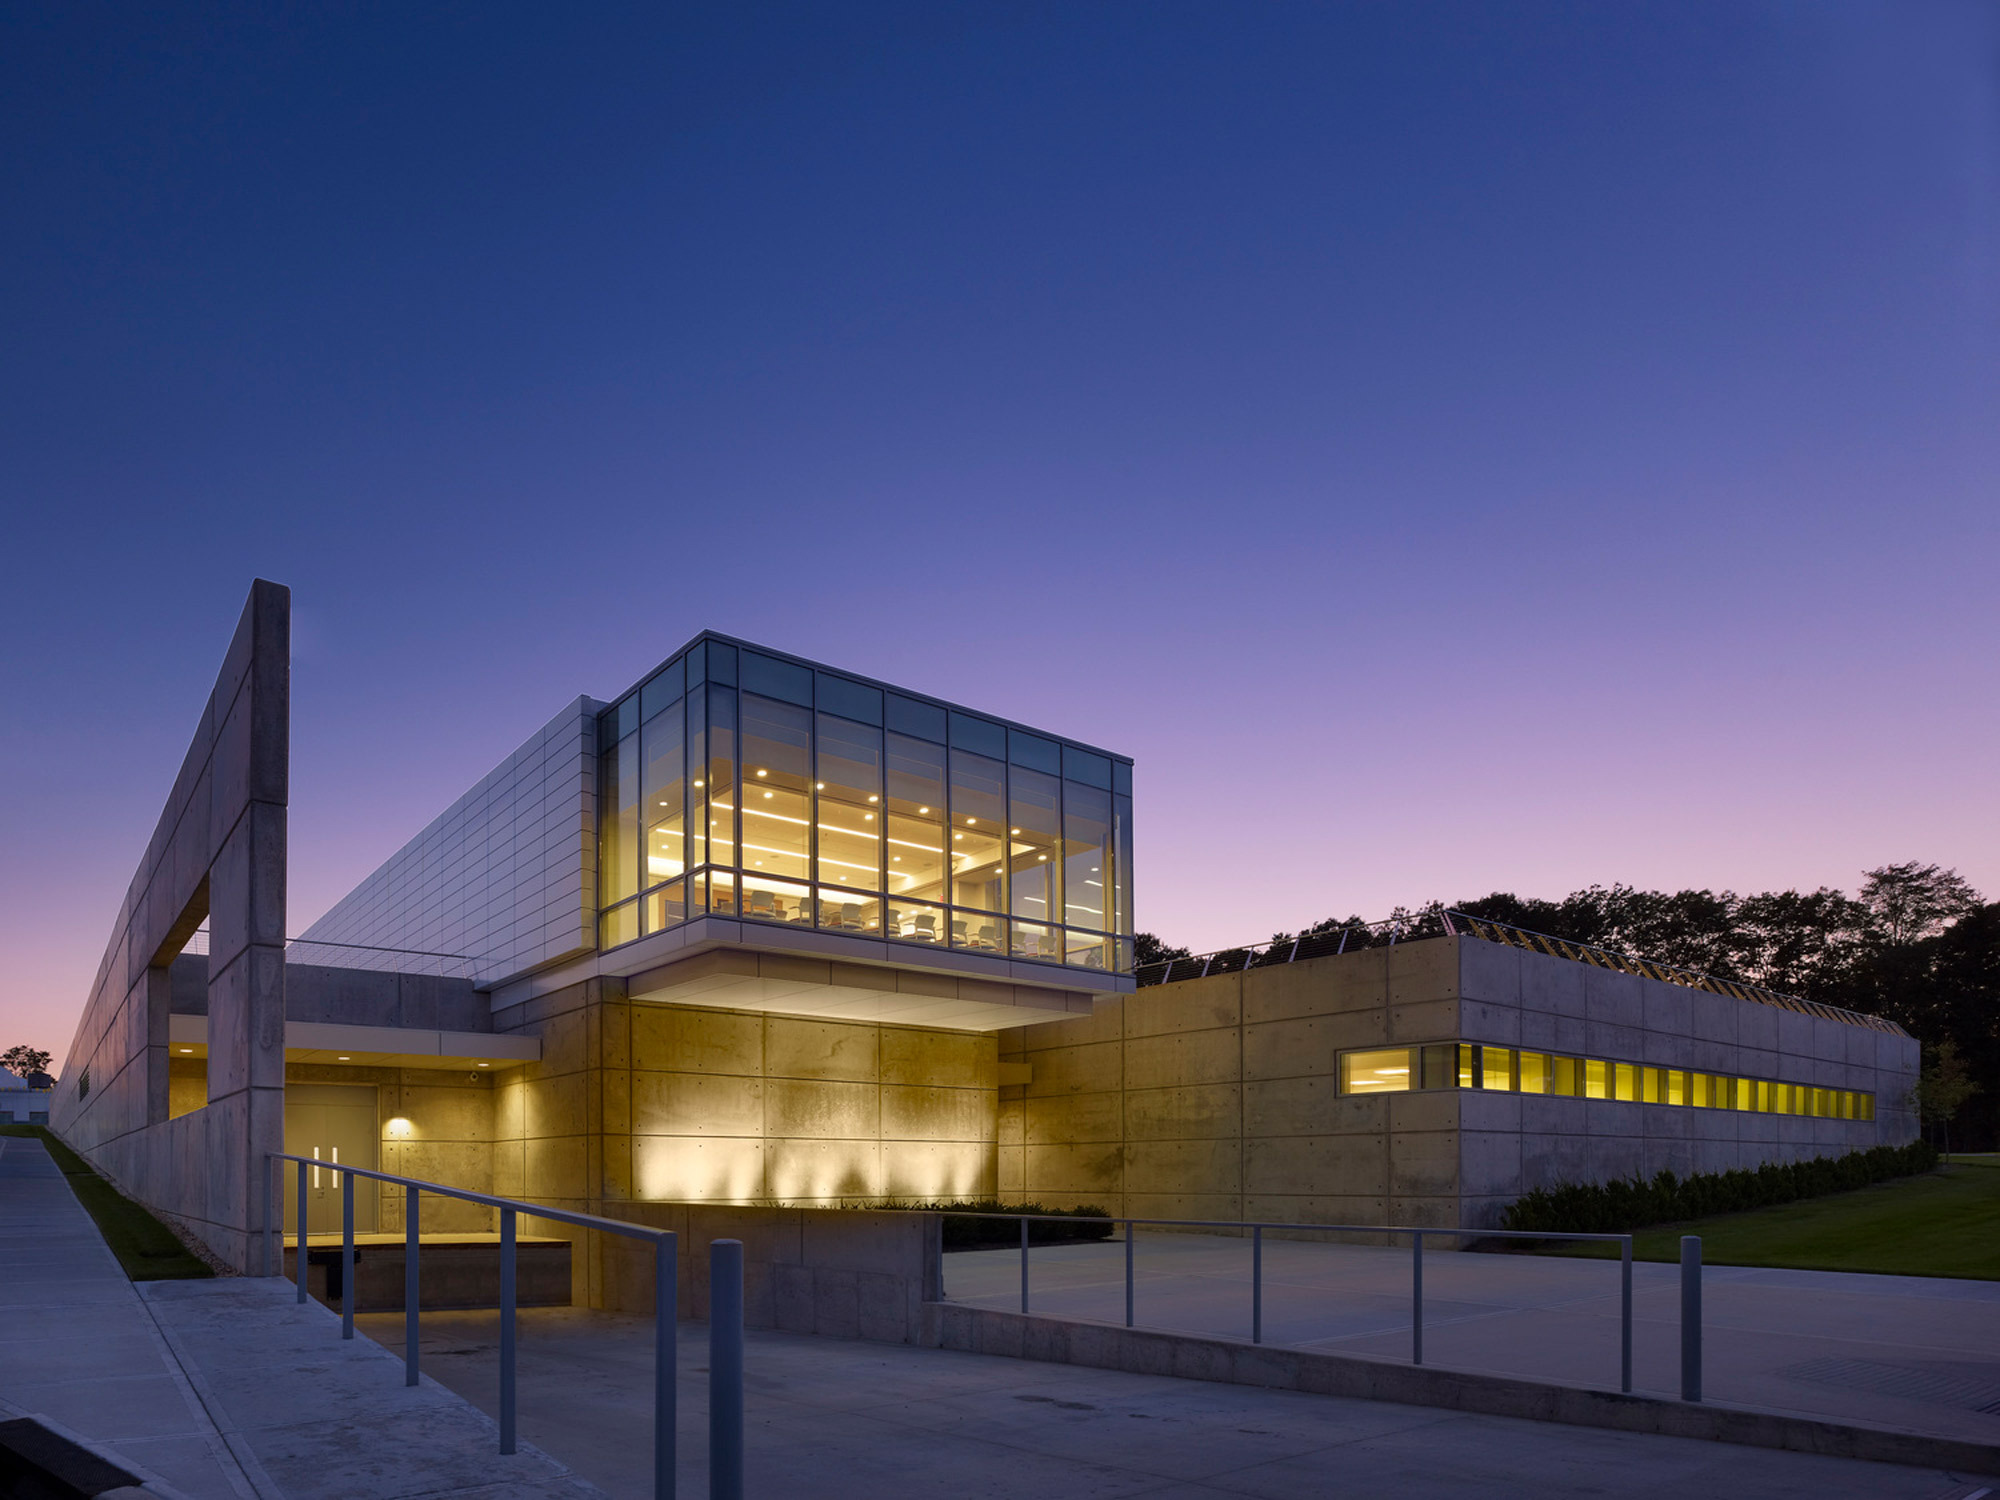 Modern architectural building at dusk with illuminated interiors visible through large windows. The structure features clean lines, cantilevered upper level, and subtle accent lighting highlighting its geometric form against a gradient twilight sky.